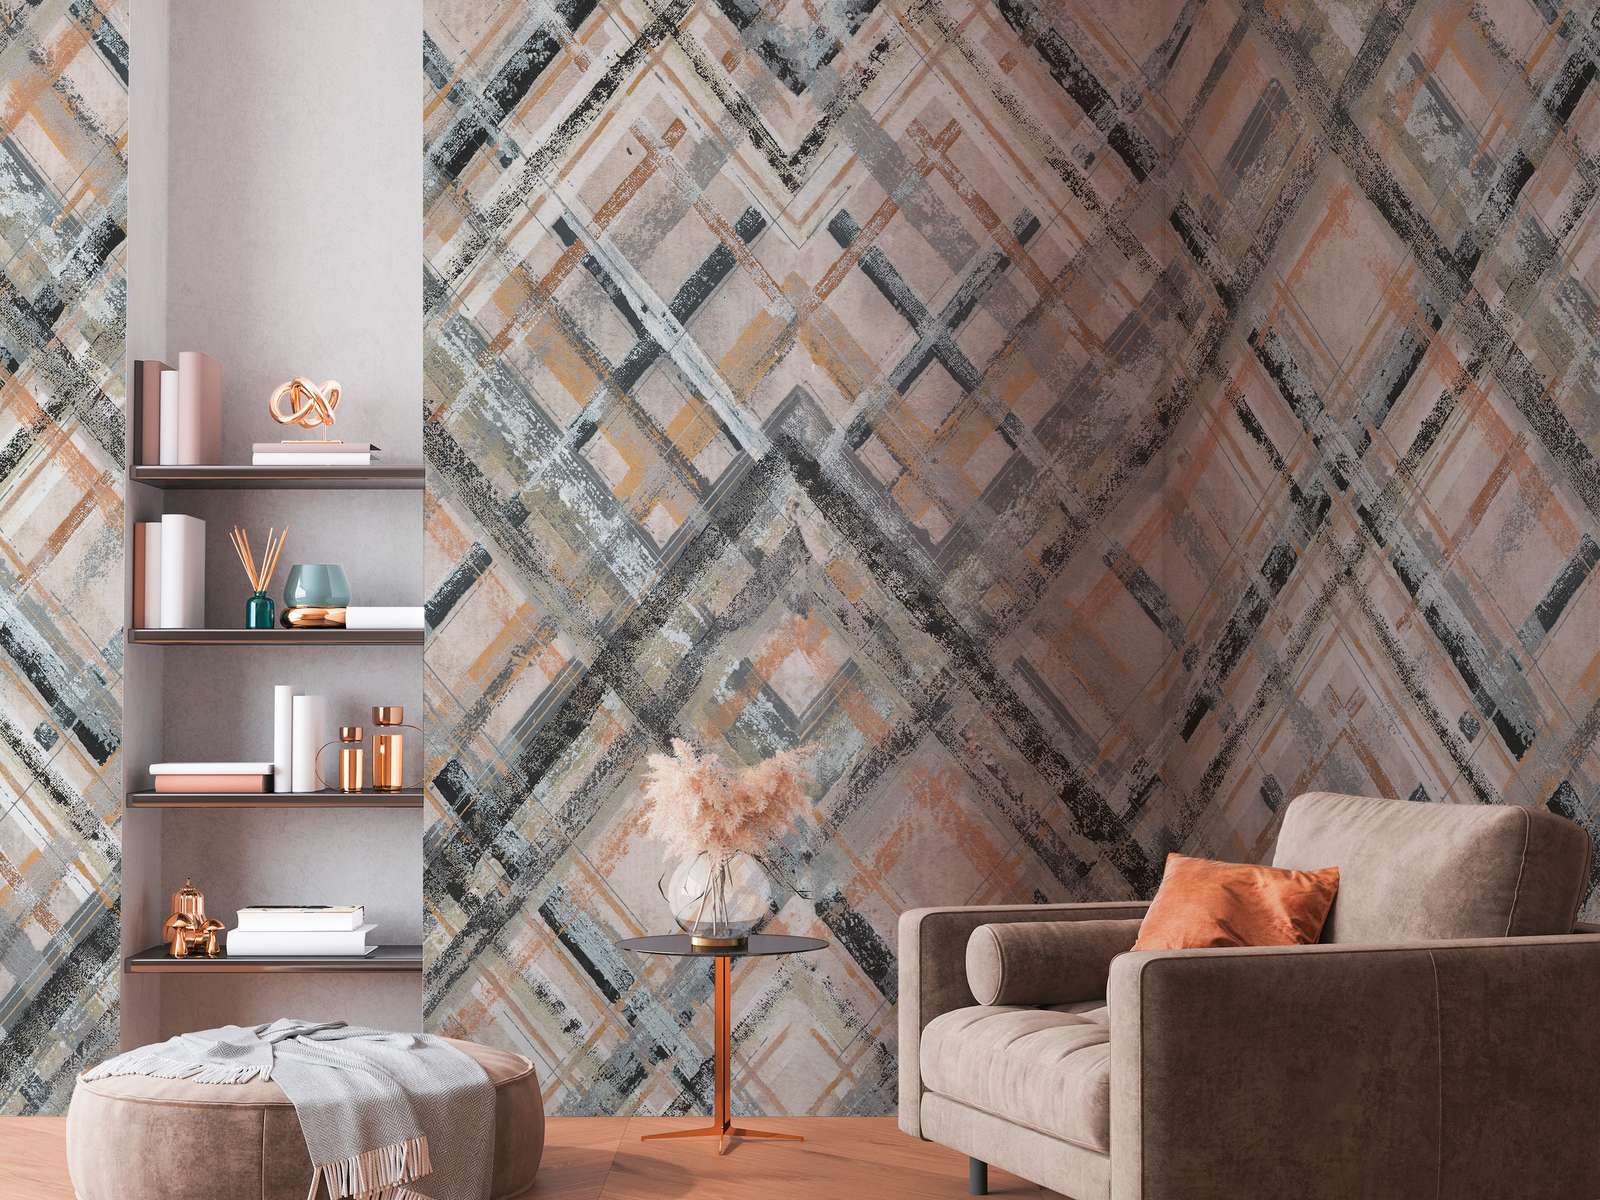             Abstract non-woven wallpaper with geometric pattern - grey, beige, blue-grey
        